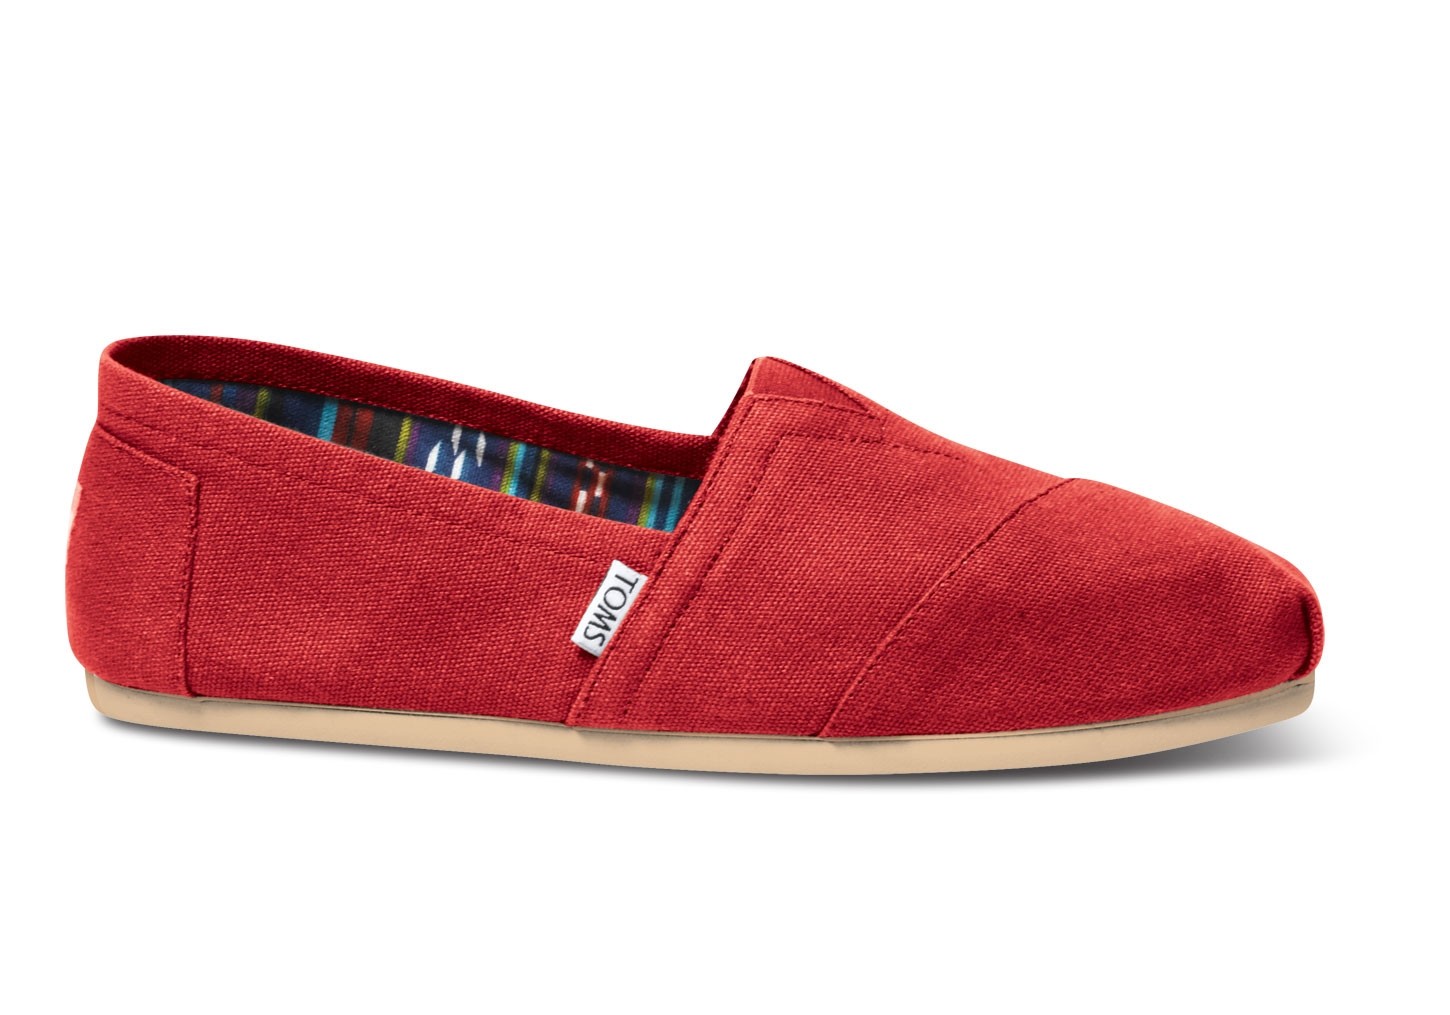 Toms Men's Slip On Classic Bristol Red M Canvas Clsc Alprg Size 9 001001A07 RED